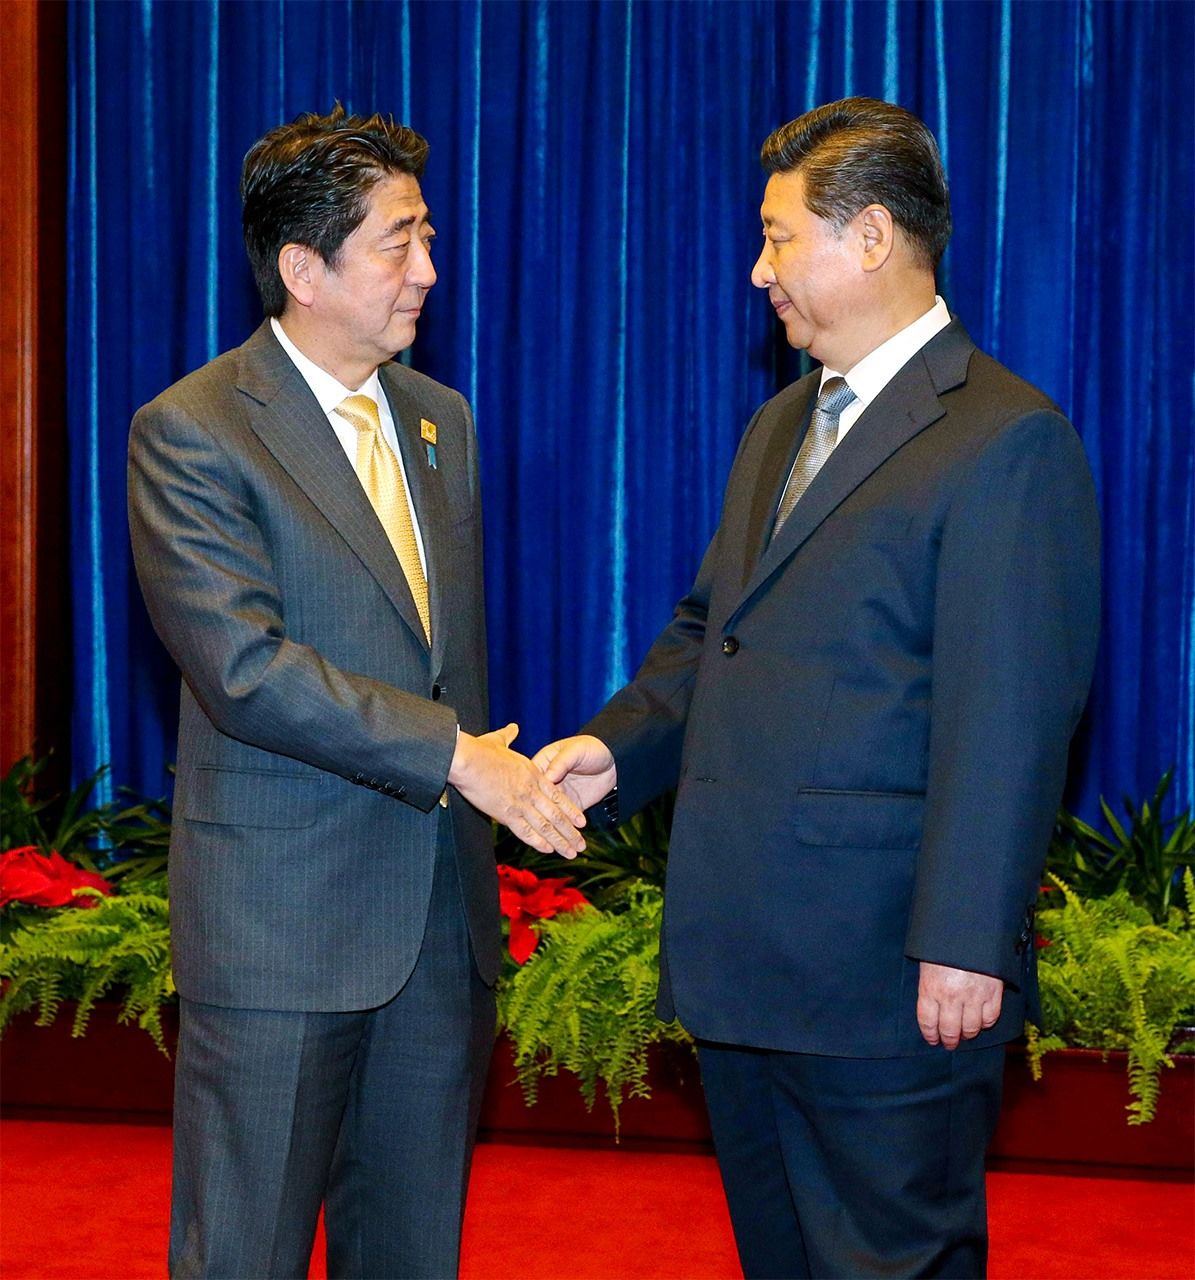 Xi Jinping, right, and Abe Shinz? shake hands after their brief summit meeting at the Great Hall of the People in Beijing on November 10, 2014. (© Jiji) 